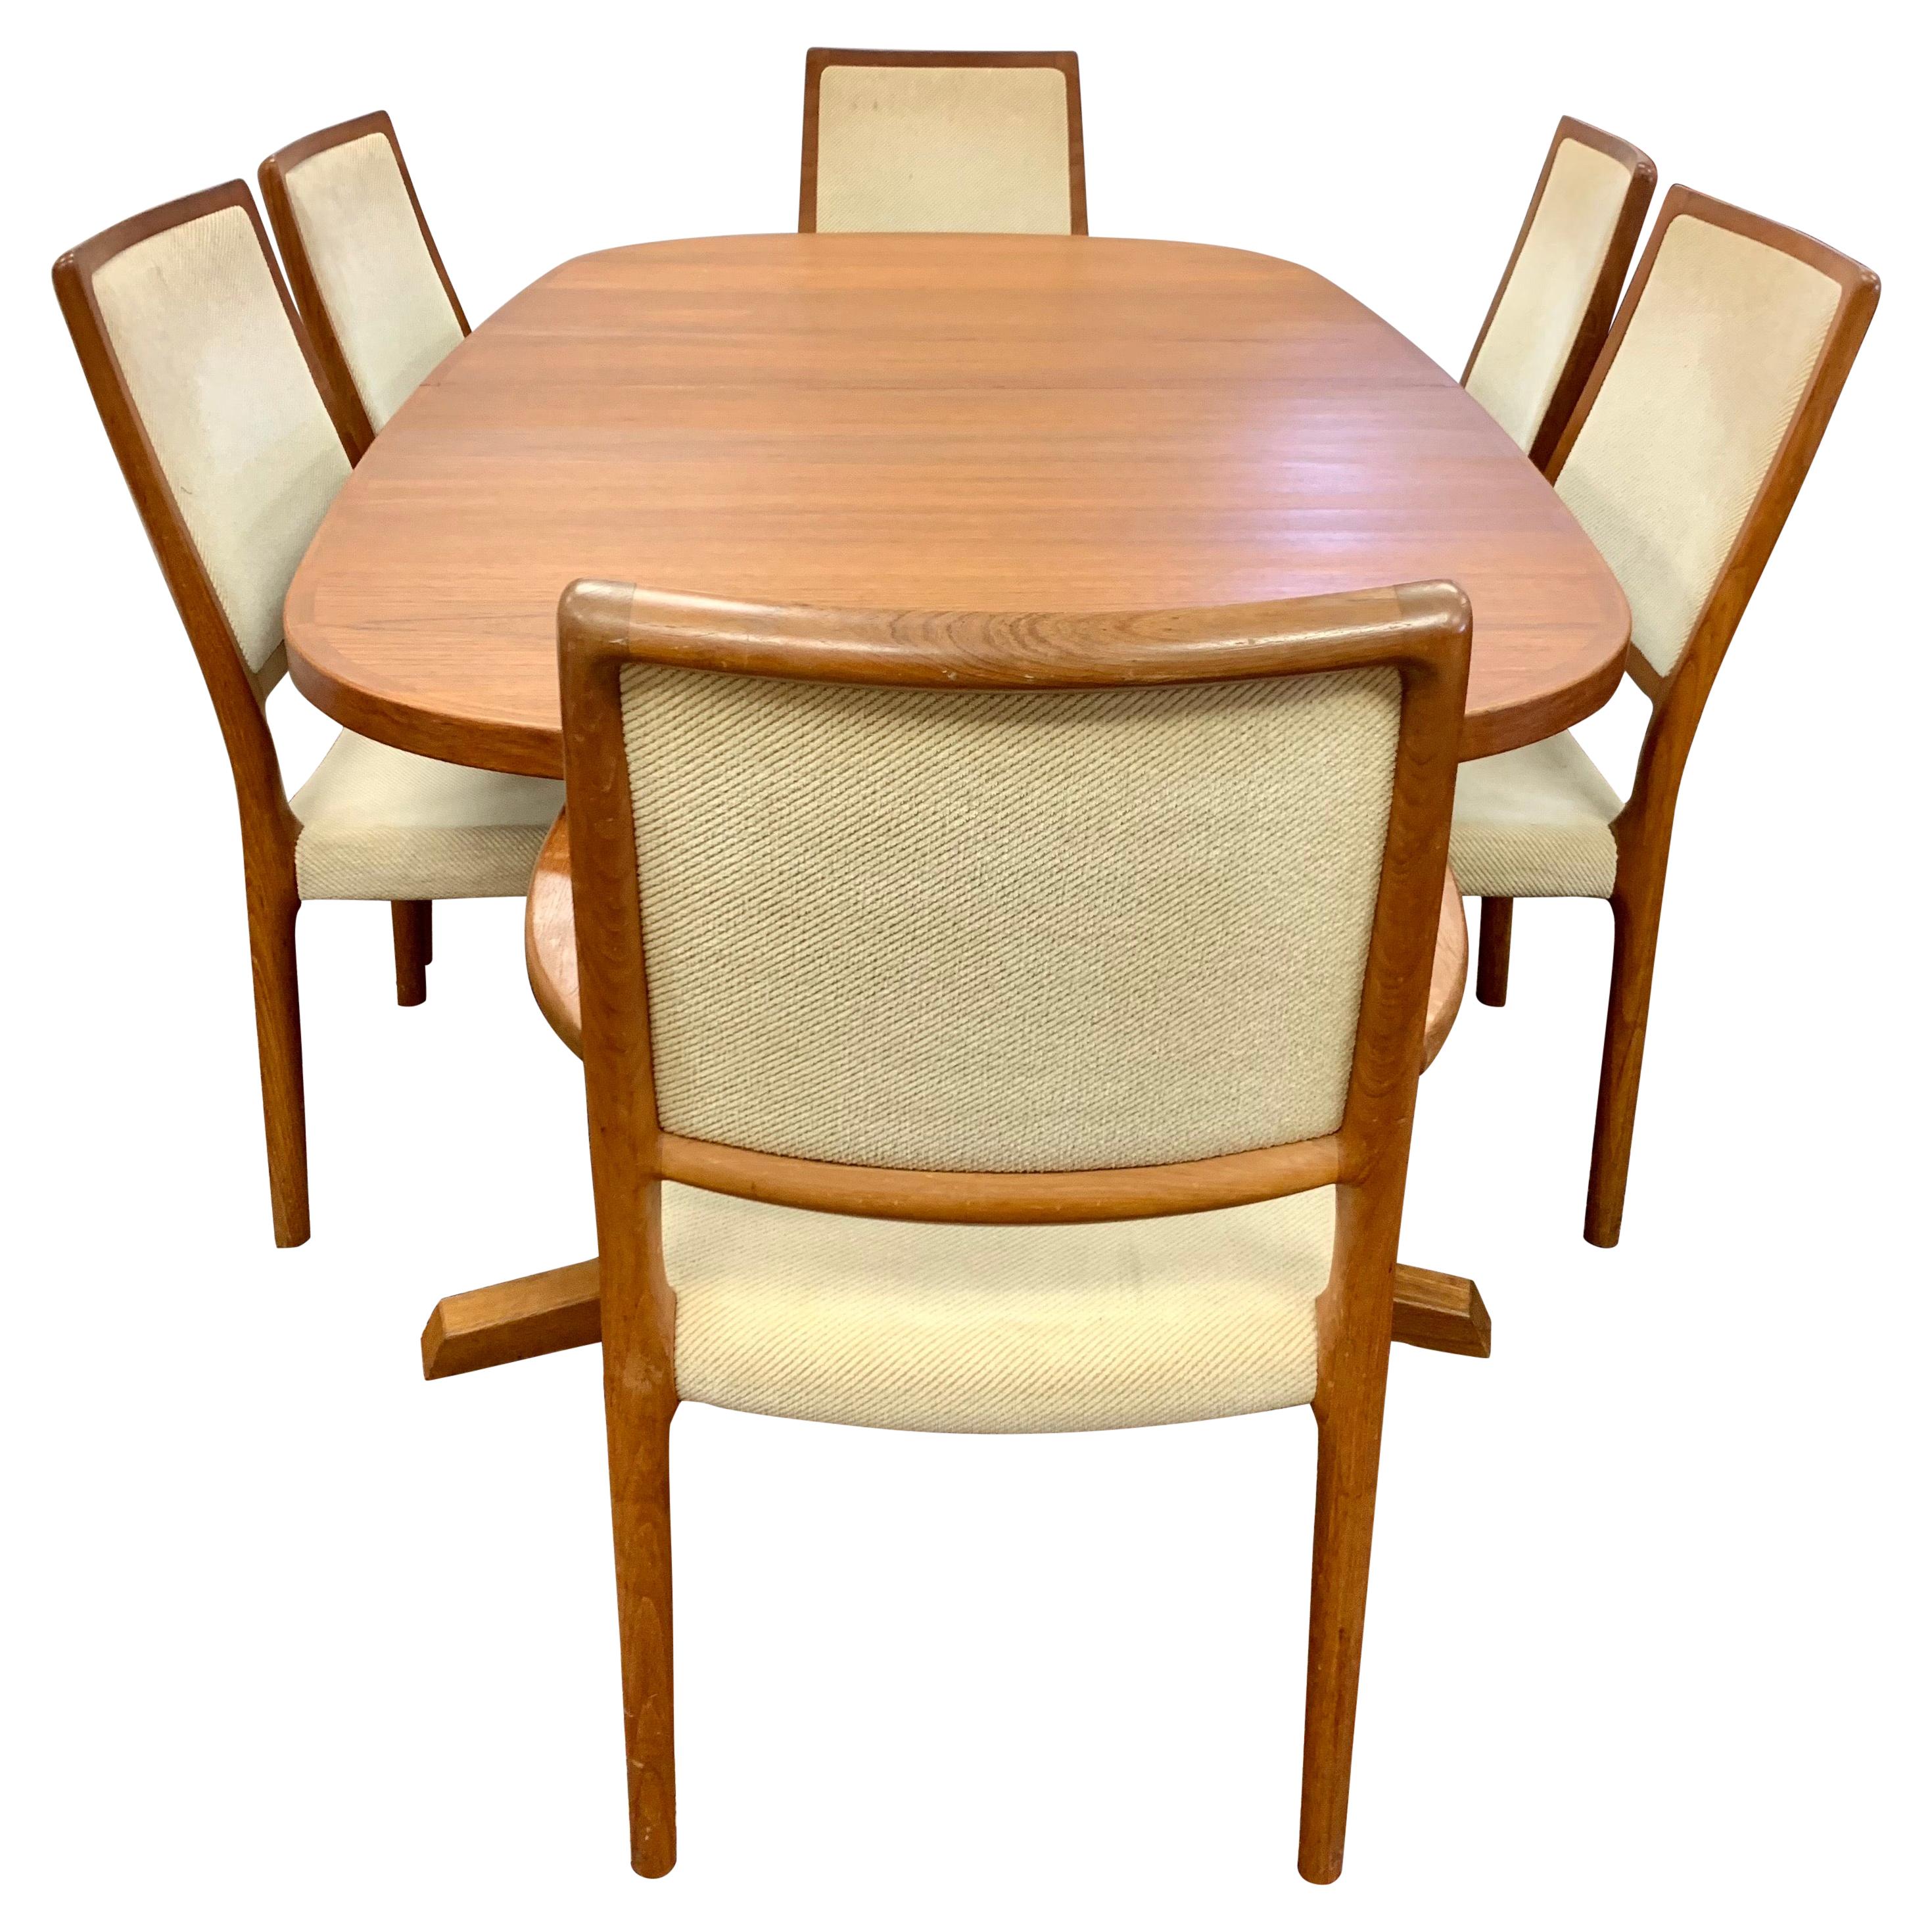 Niels Otto Moller for JL Moller Danish Modern Dining Room Set Table & 6 Chairs